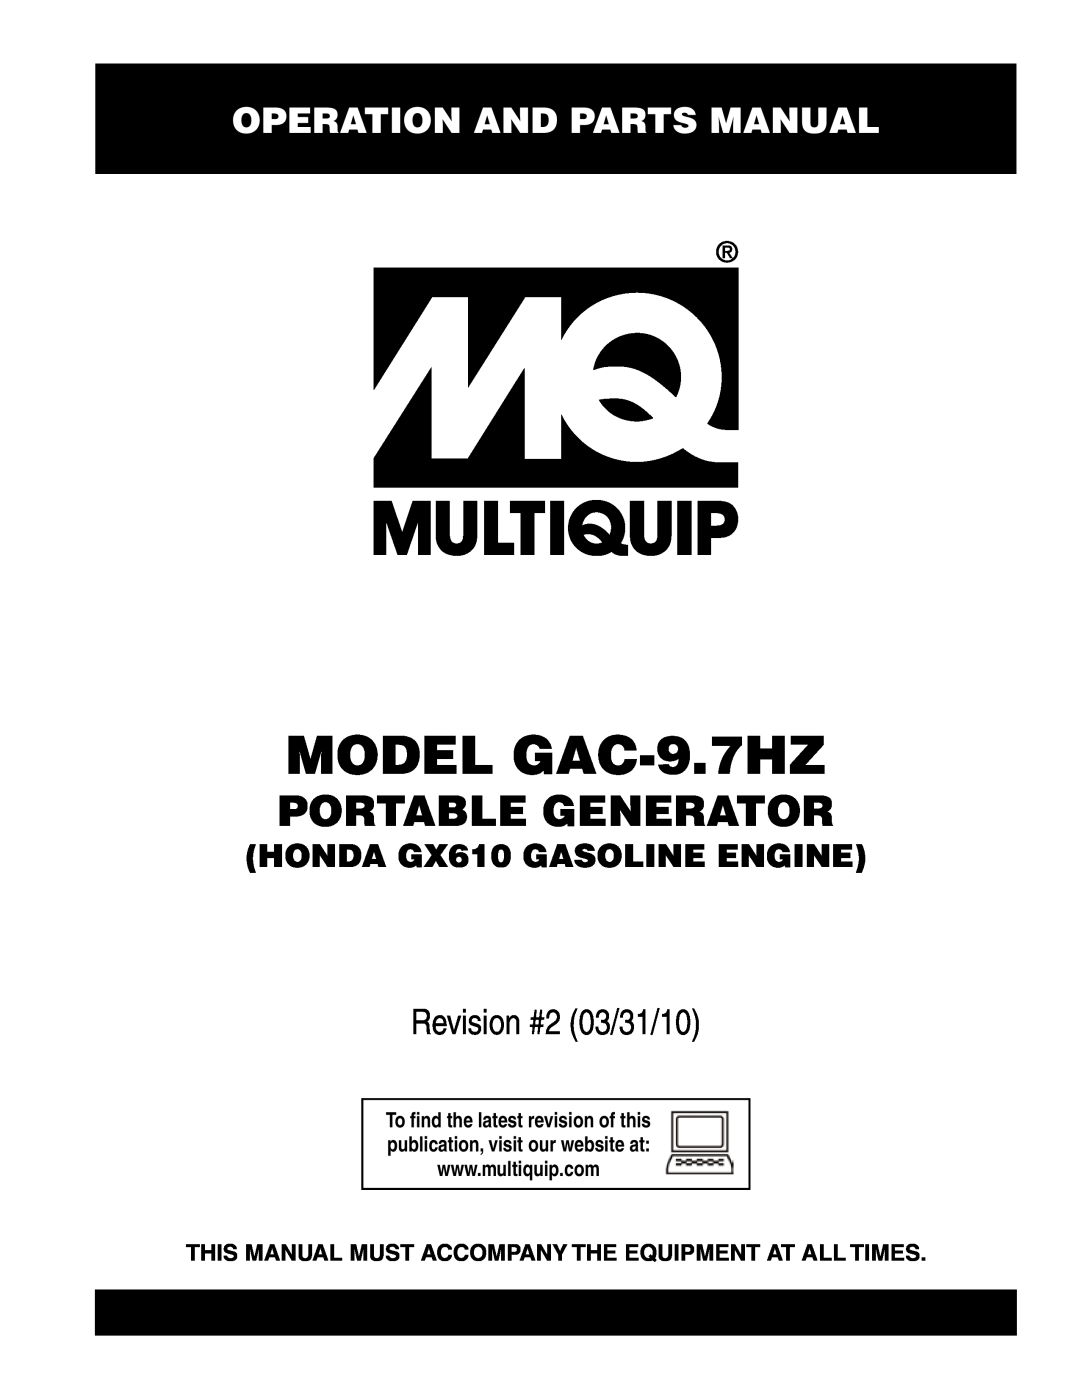 Multiquip GAC-9.7HZ manual Operation and Parts Manual, This Manual Must Accompany The Equipment At All Times 